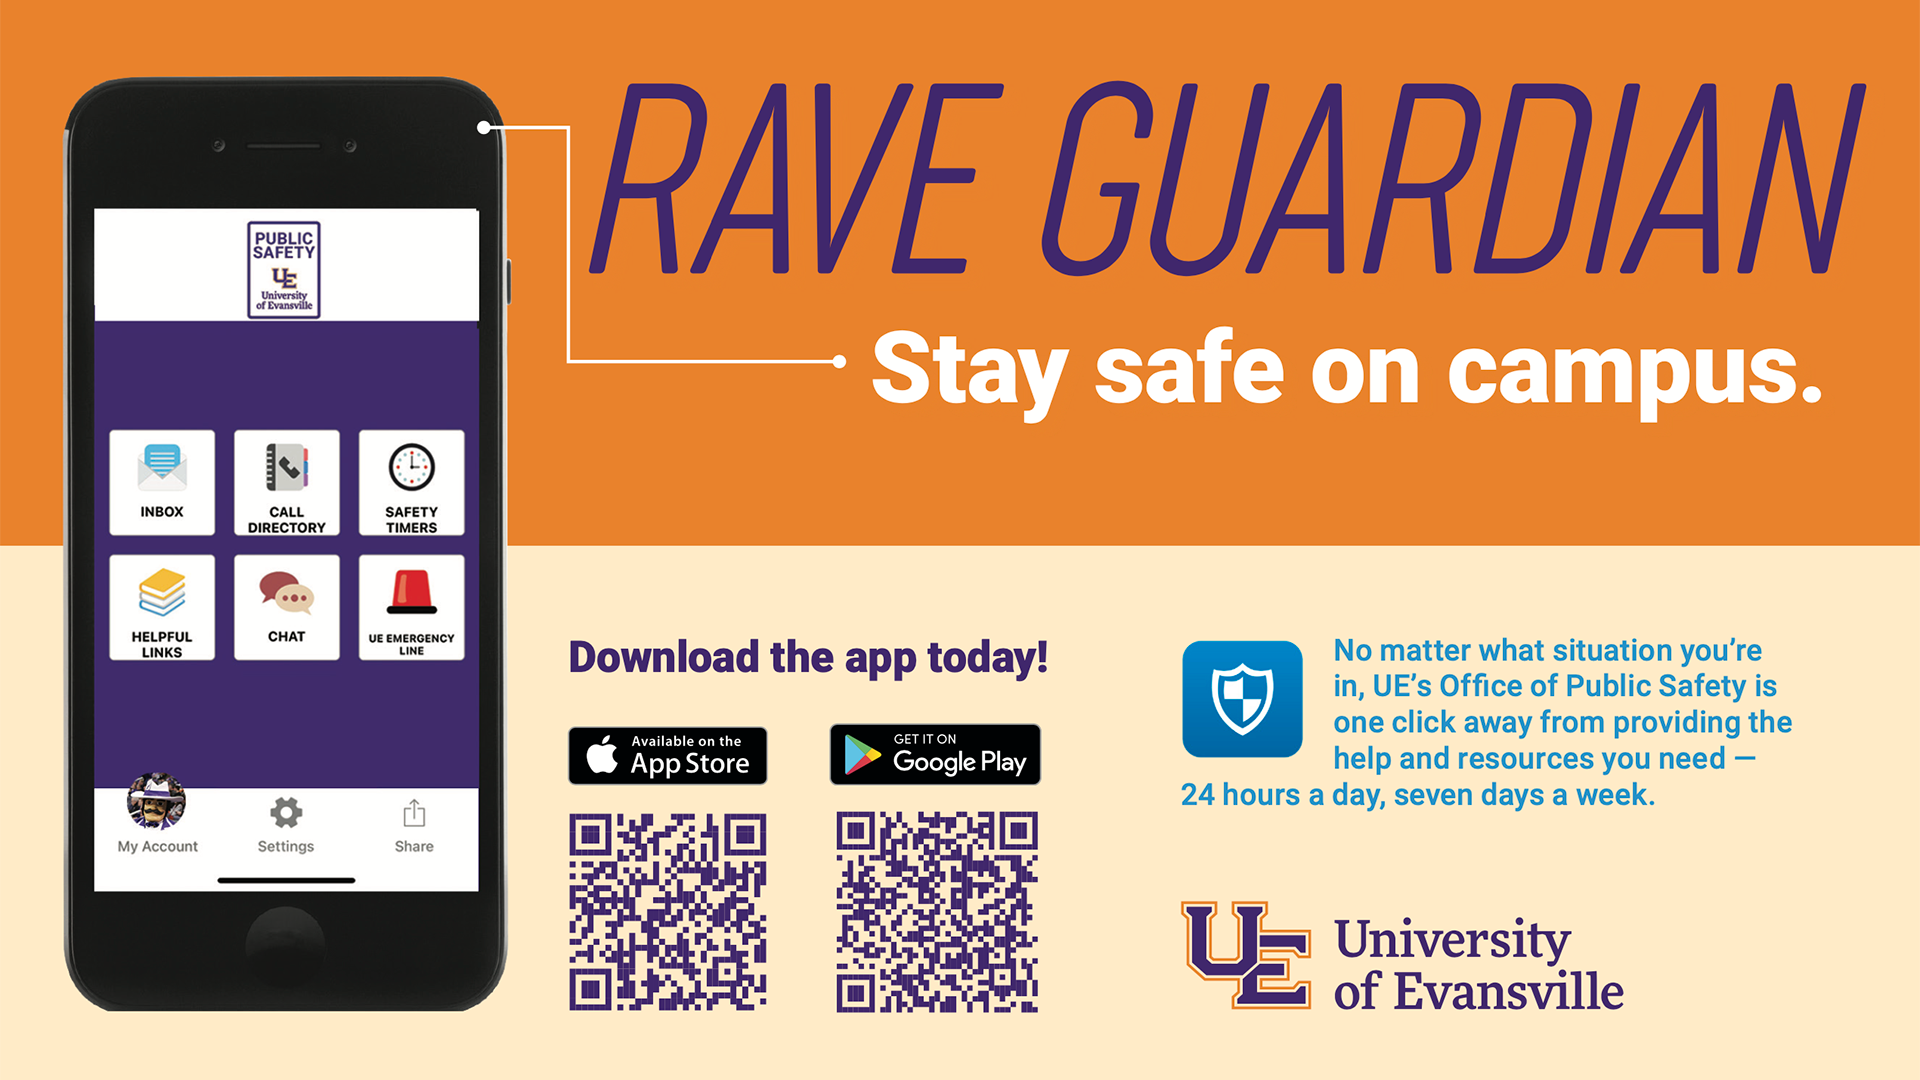 Rave Guardian app infographic